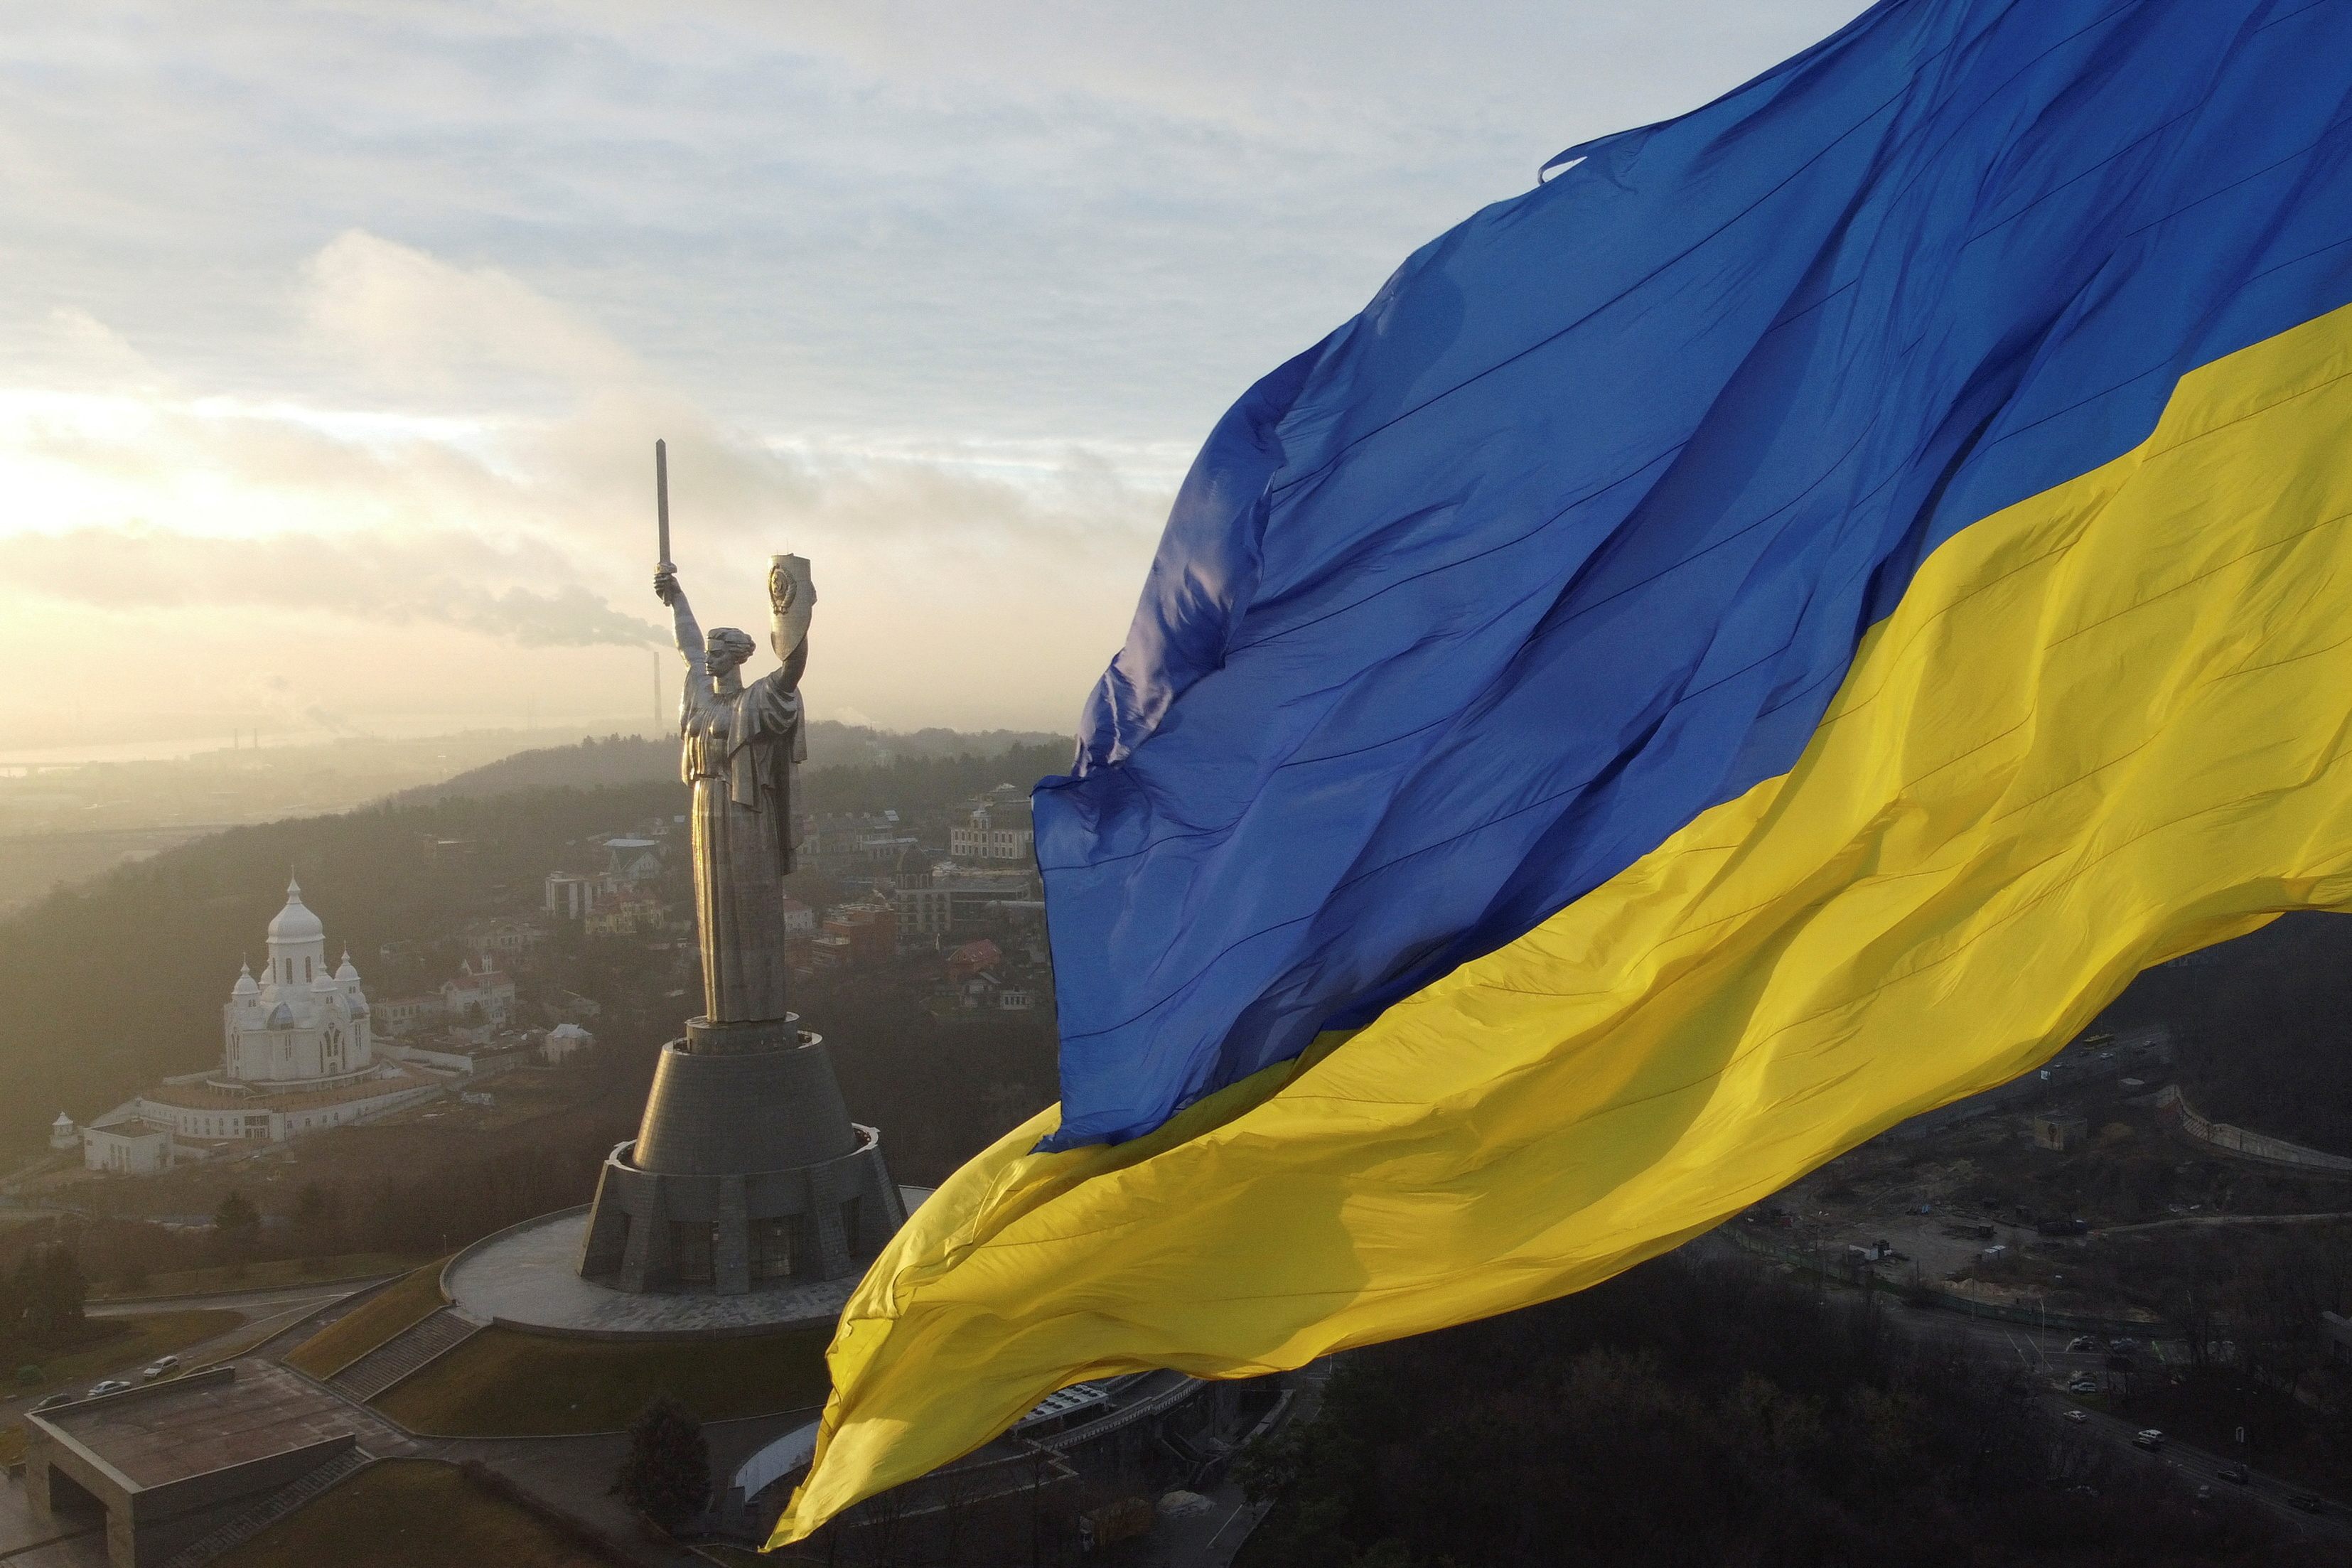 Ukraine's biggest national flag on the country's highest flagpole and the giant 'Motherland' monument are seen at a compound of the World War II museum in Kyiv, Ukraine, December 16, 2021. Picture taken with a drone. REUTERS/Valentyn Ogirenko